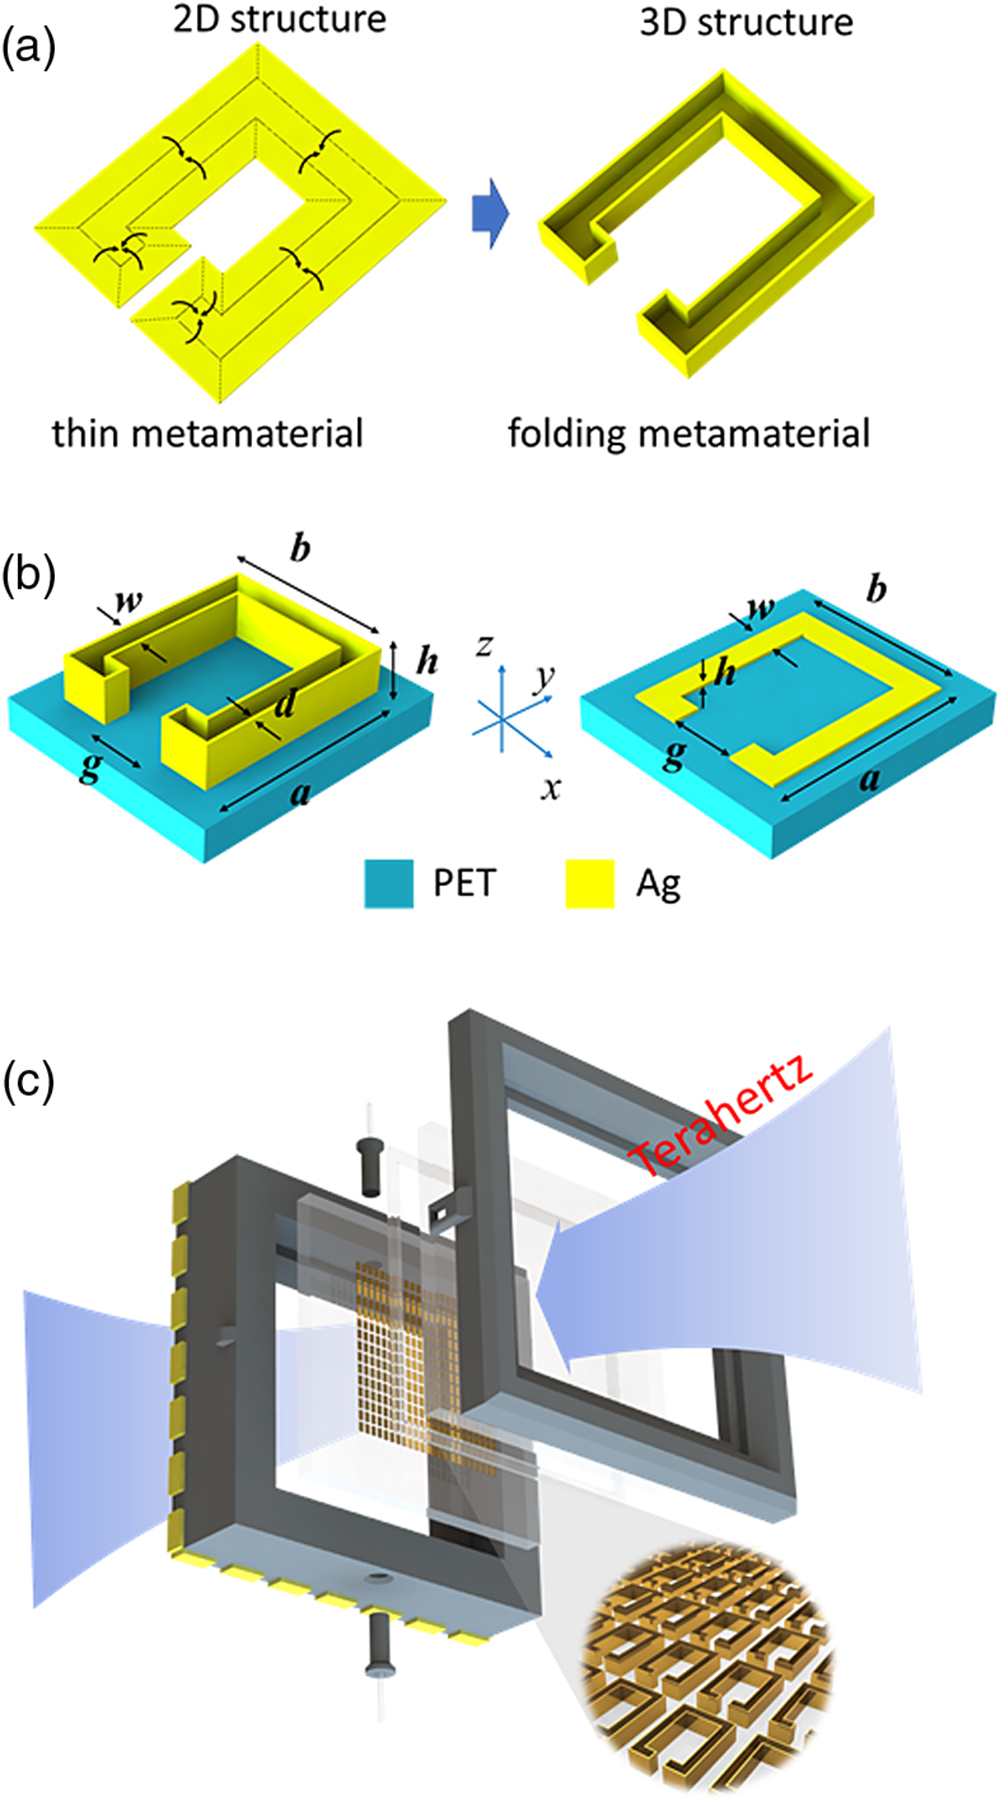 (a) Design of folding metamaterial. The folding metamaterial comprises SRRs with nano-profiles. (b) Geometrical dimensions of folding and common metamaterials. (c) Illustration of biosensor based on folding metamaterial.